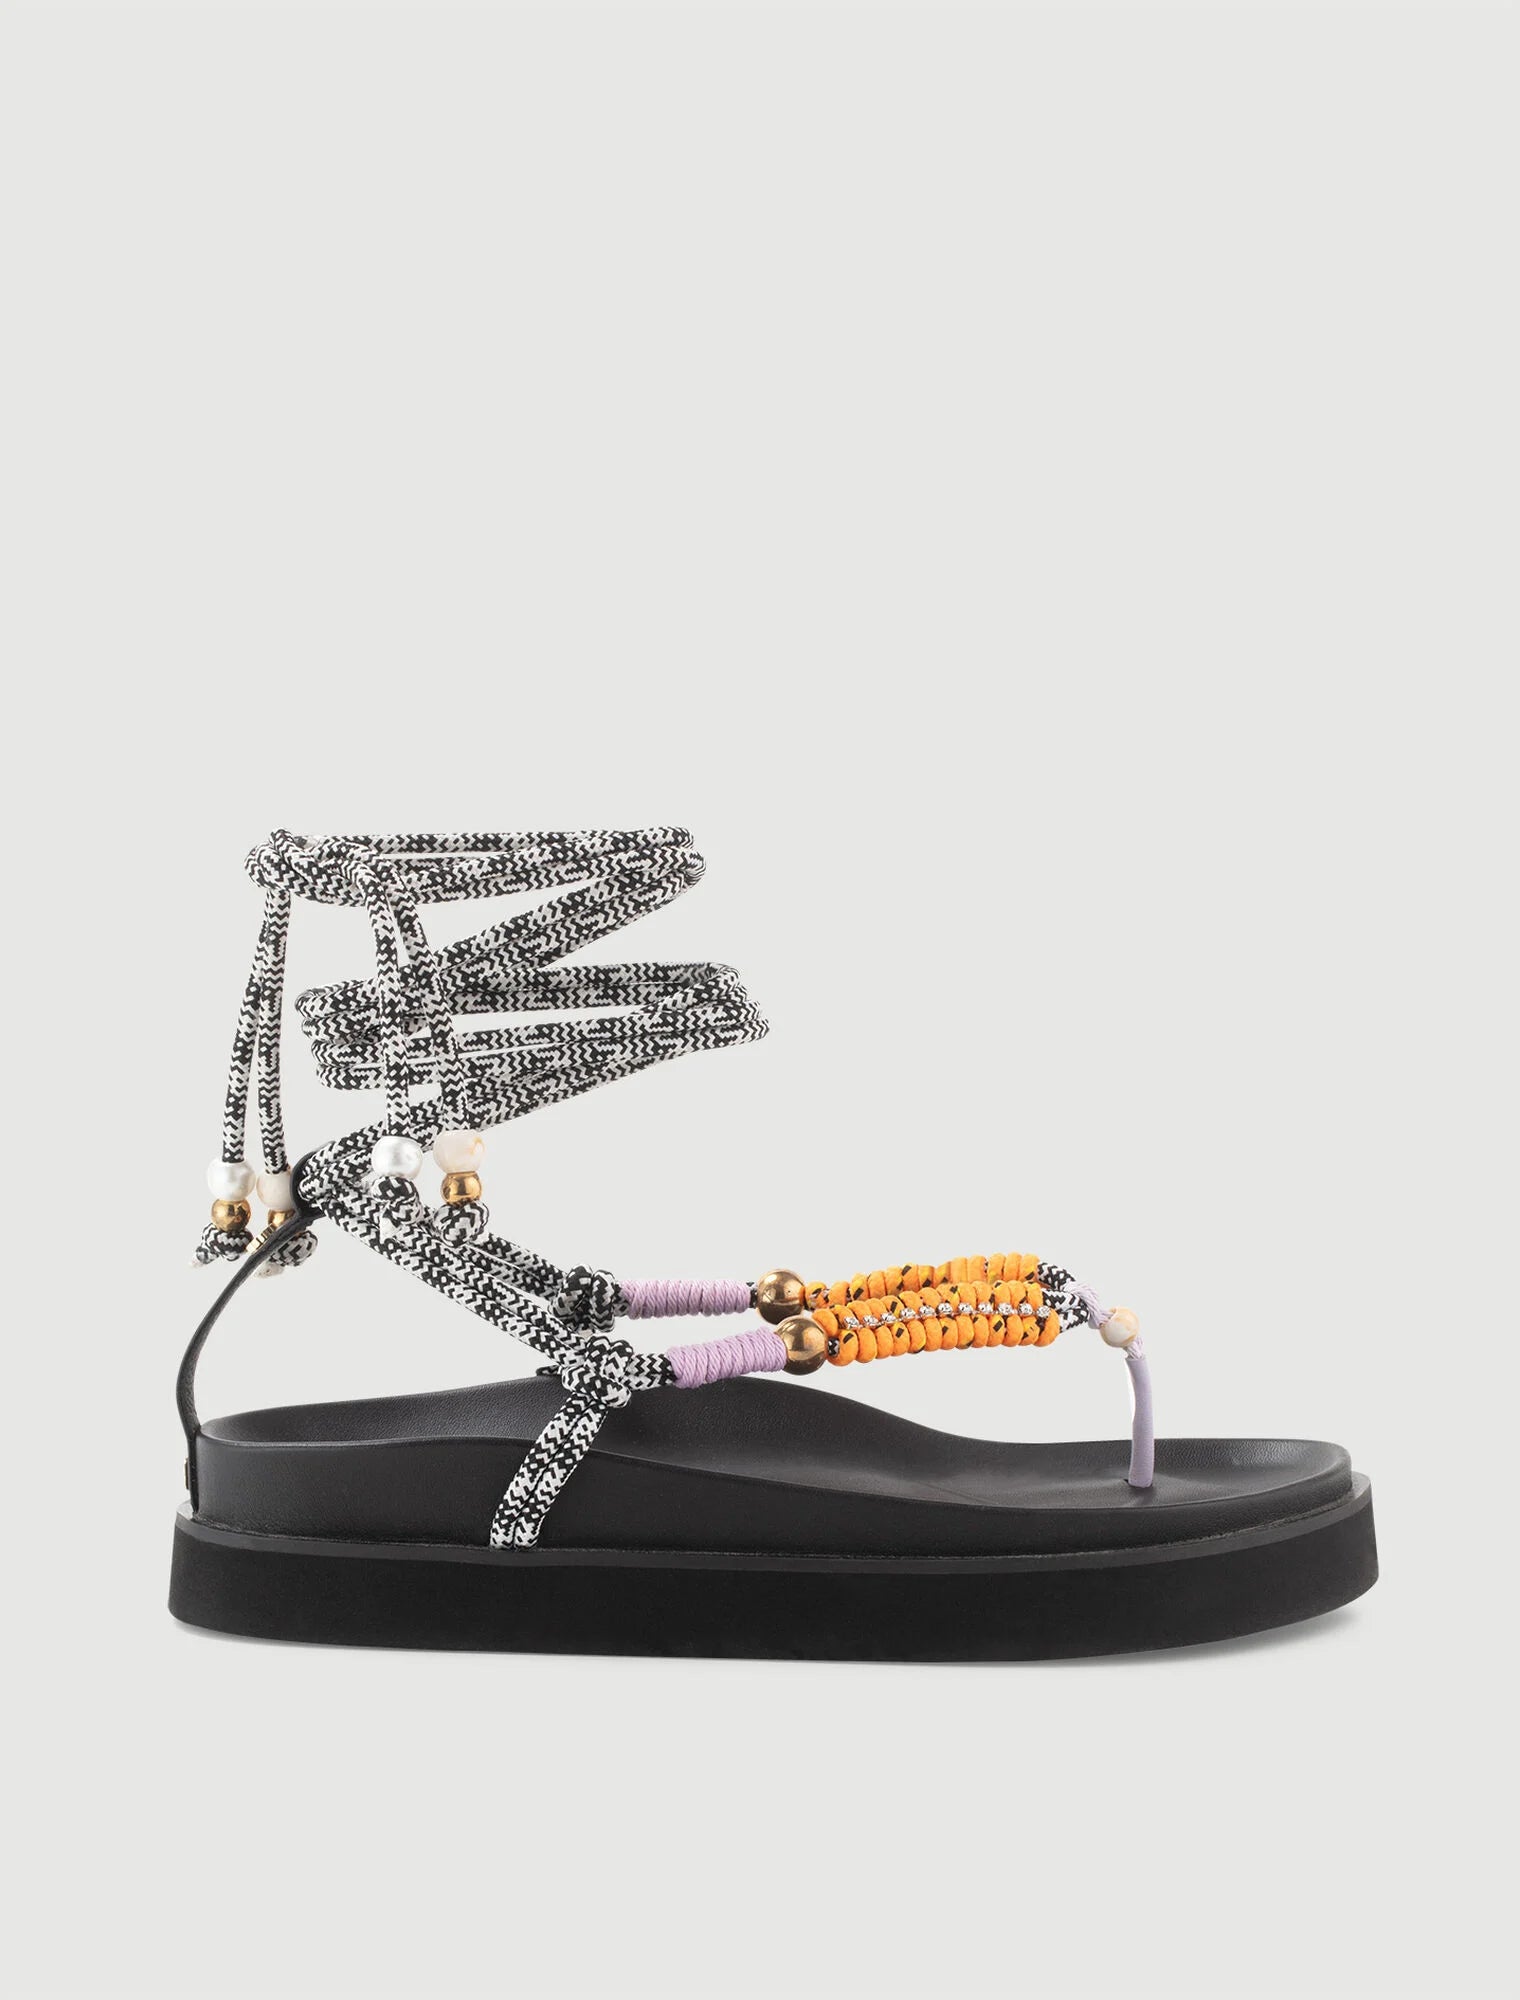 Parma Violet Sandals with braided straps